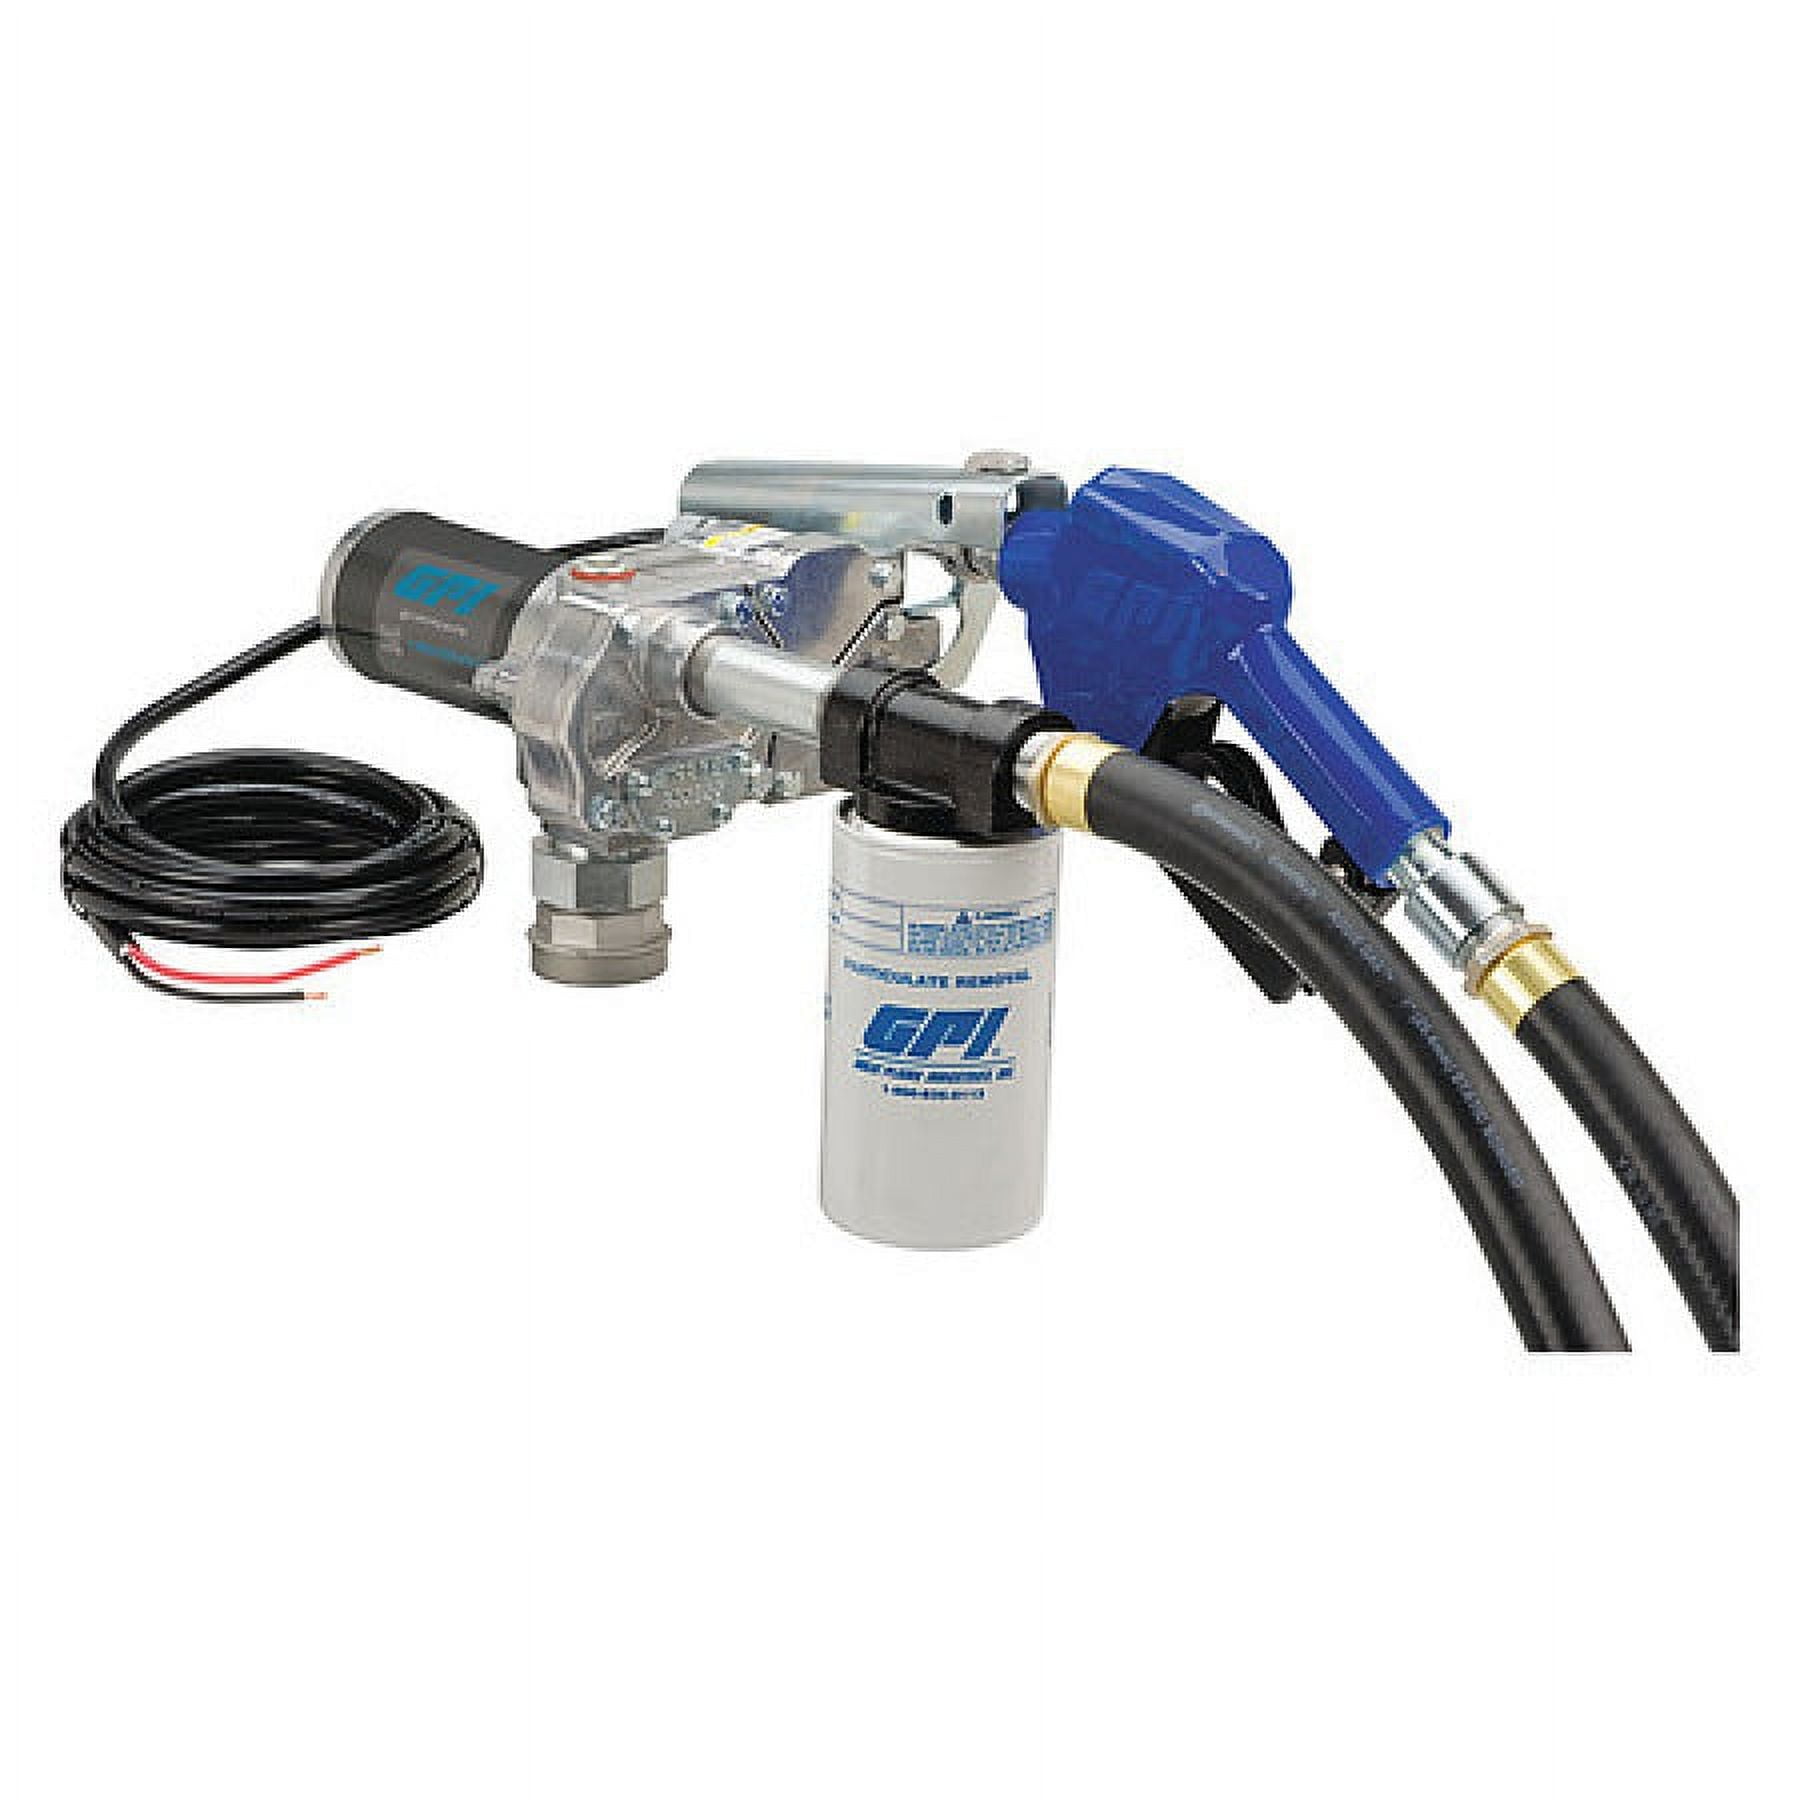 Fuel Transfer Pump with Flexible Suction Hose and Shutoff Nozzle